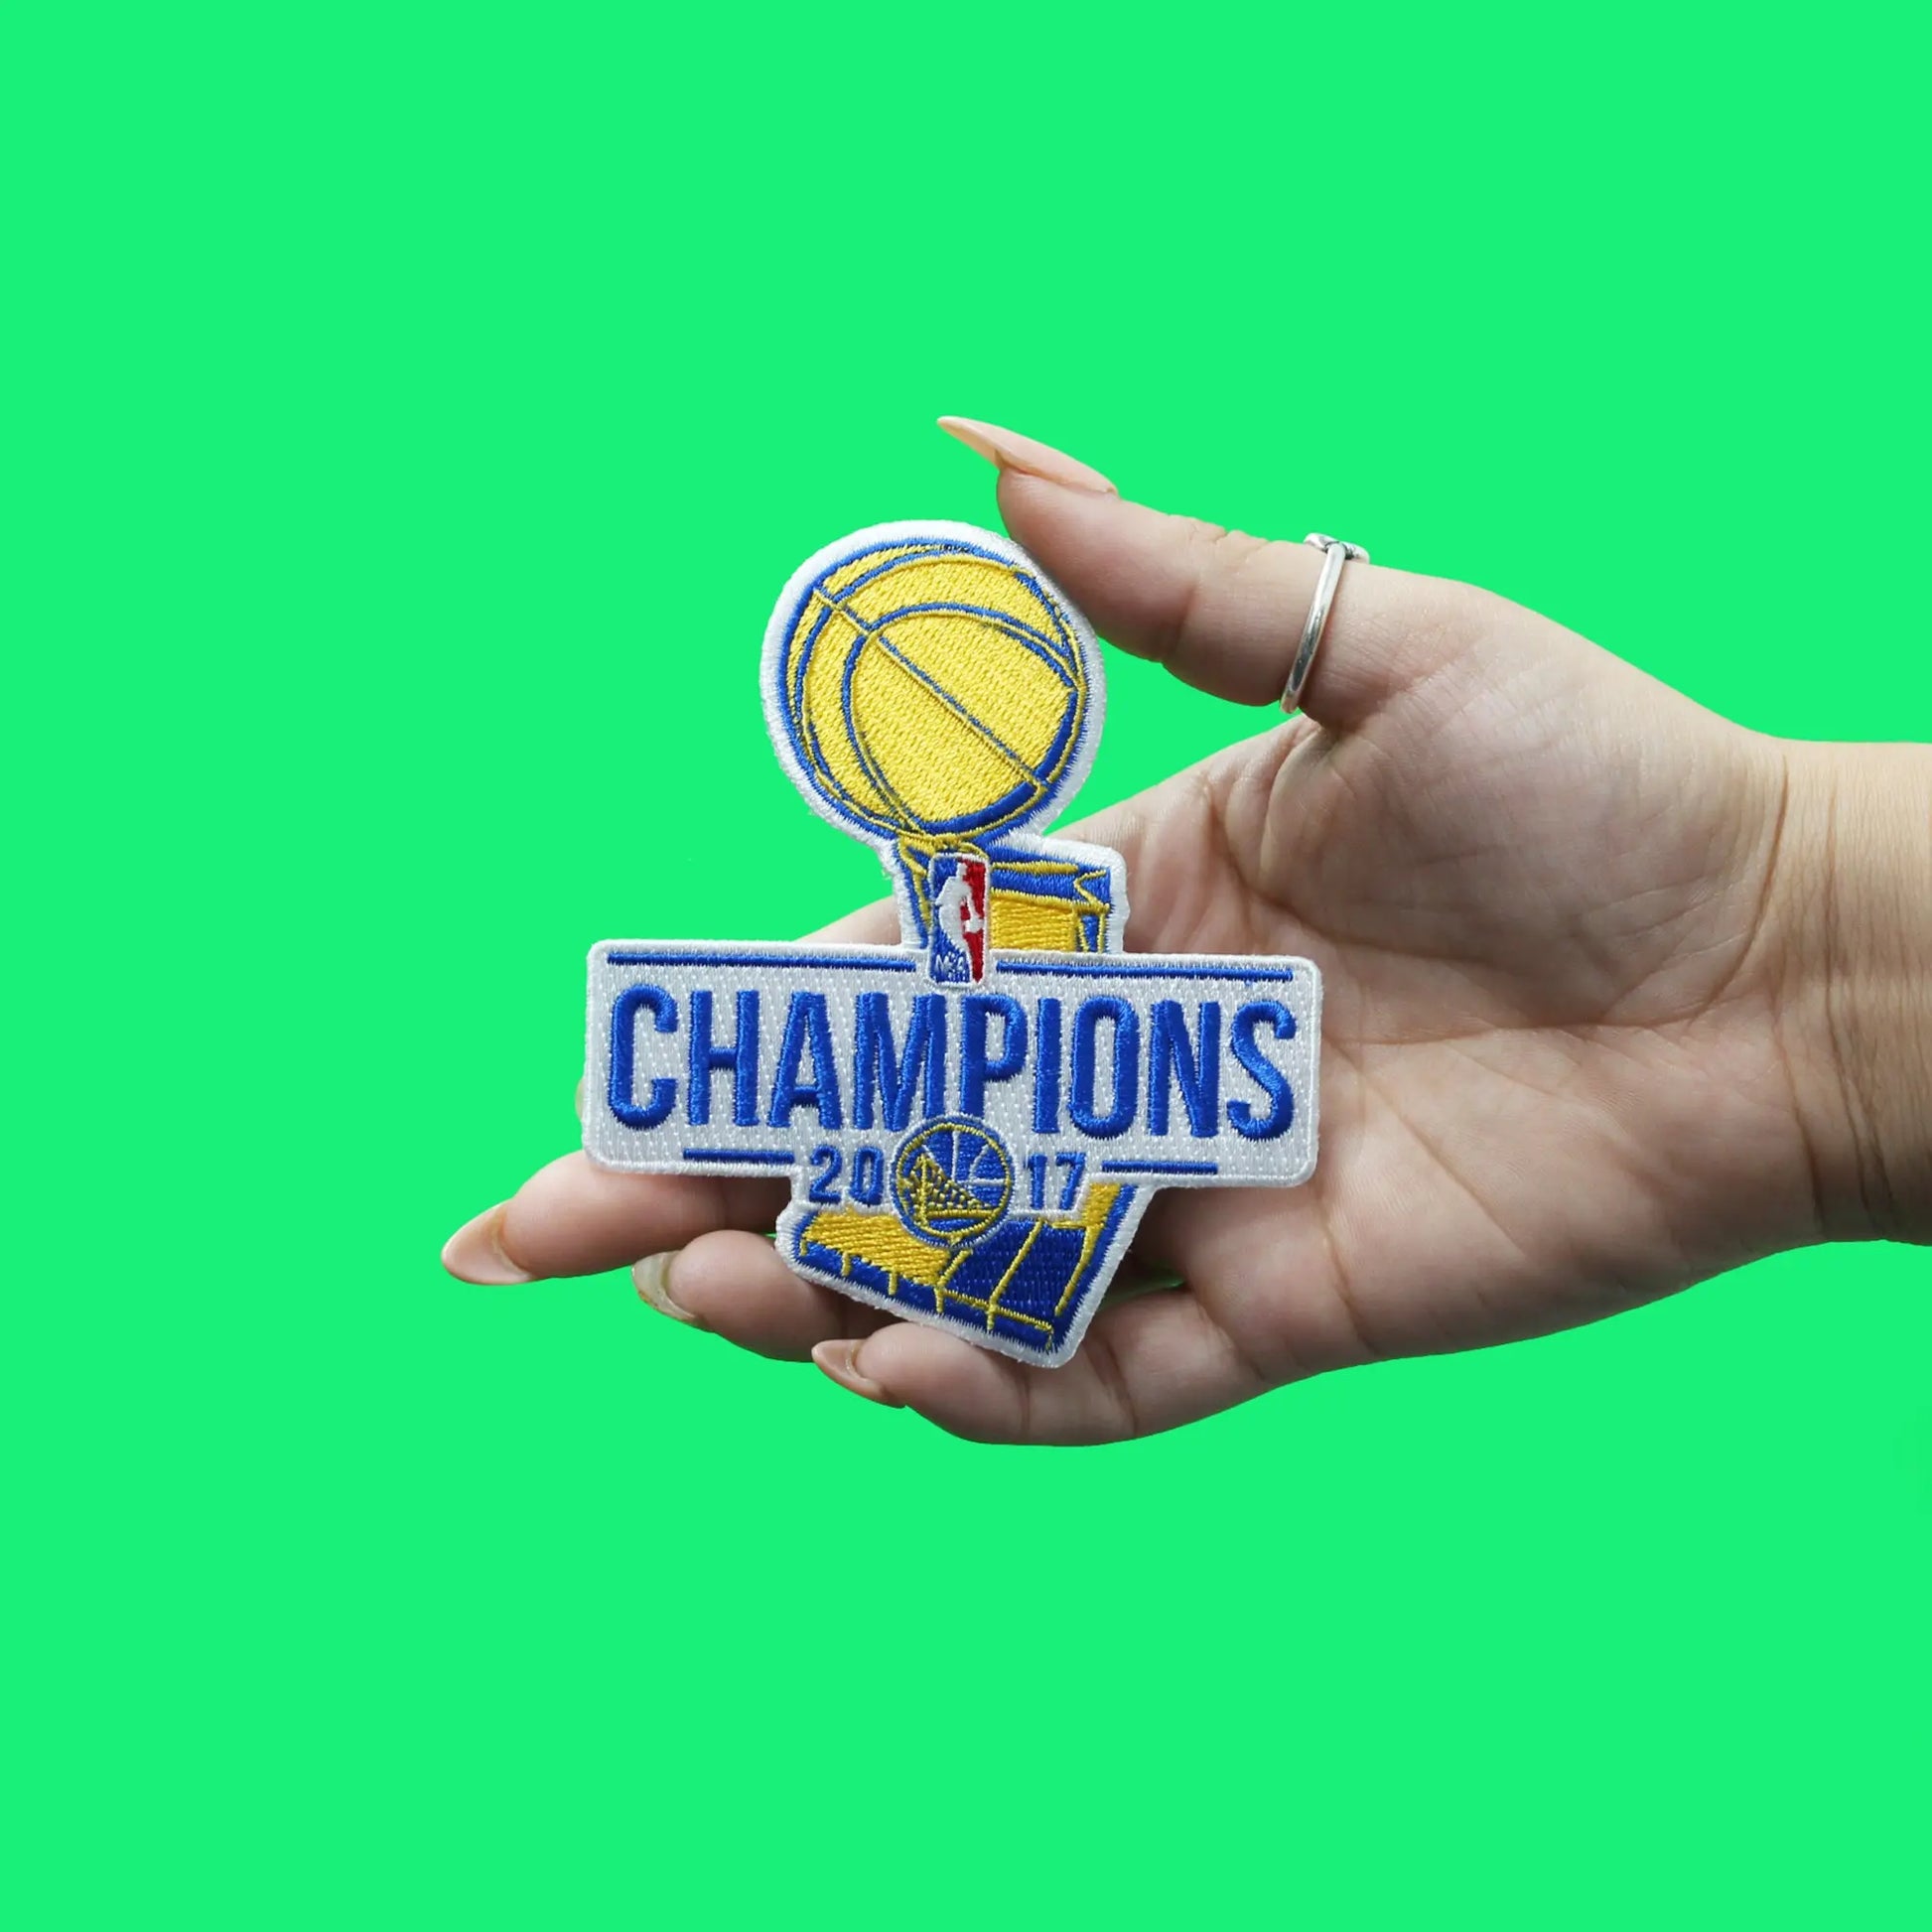 The Golden State Warriors As 2017 NBA Champions